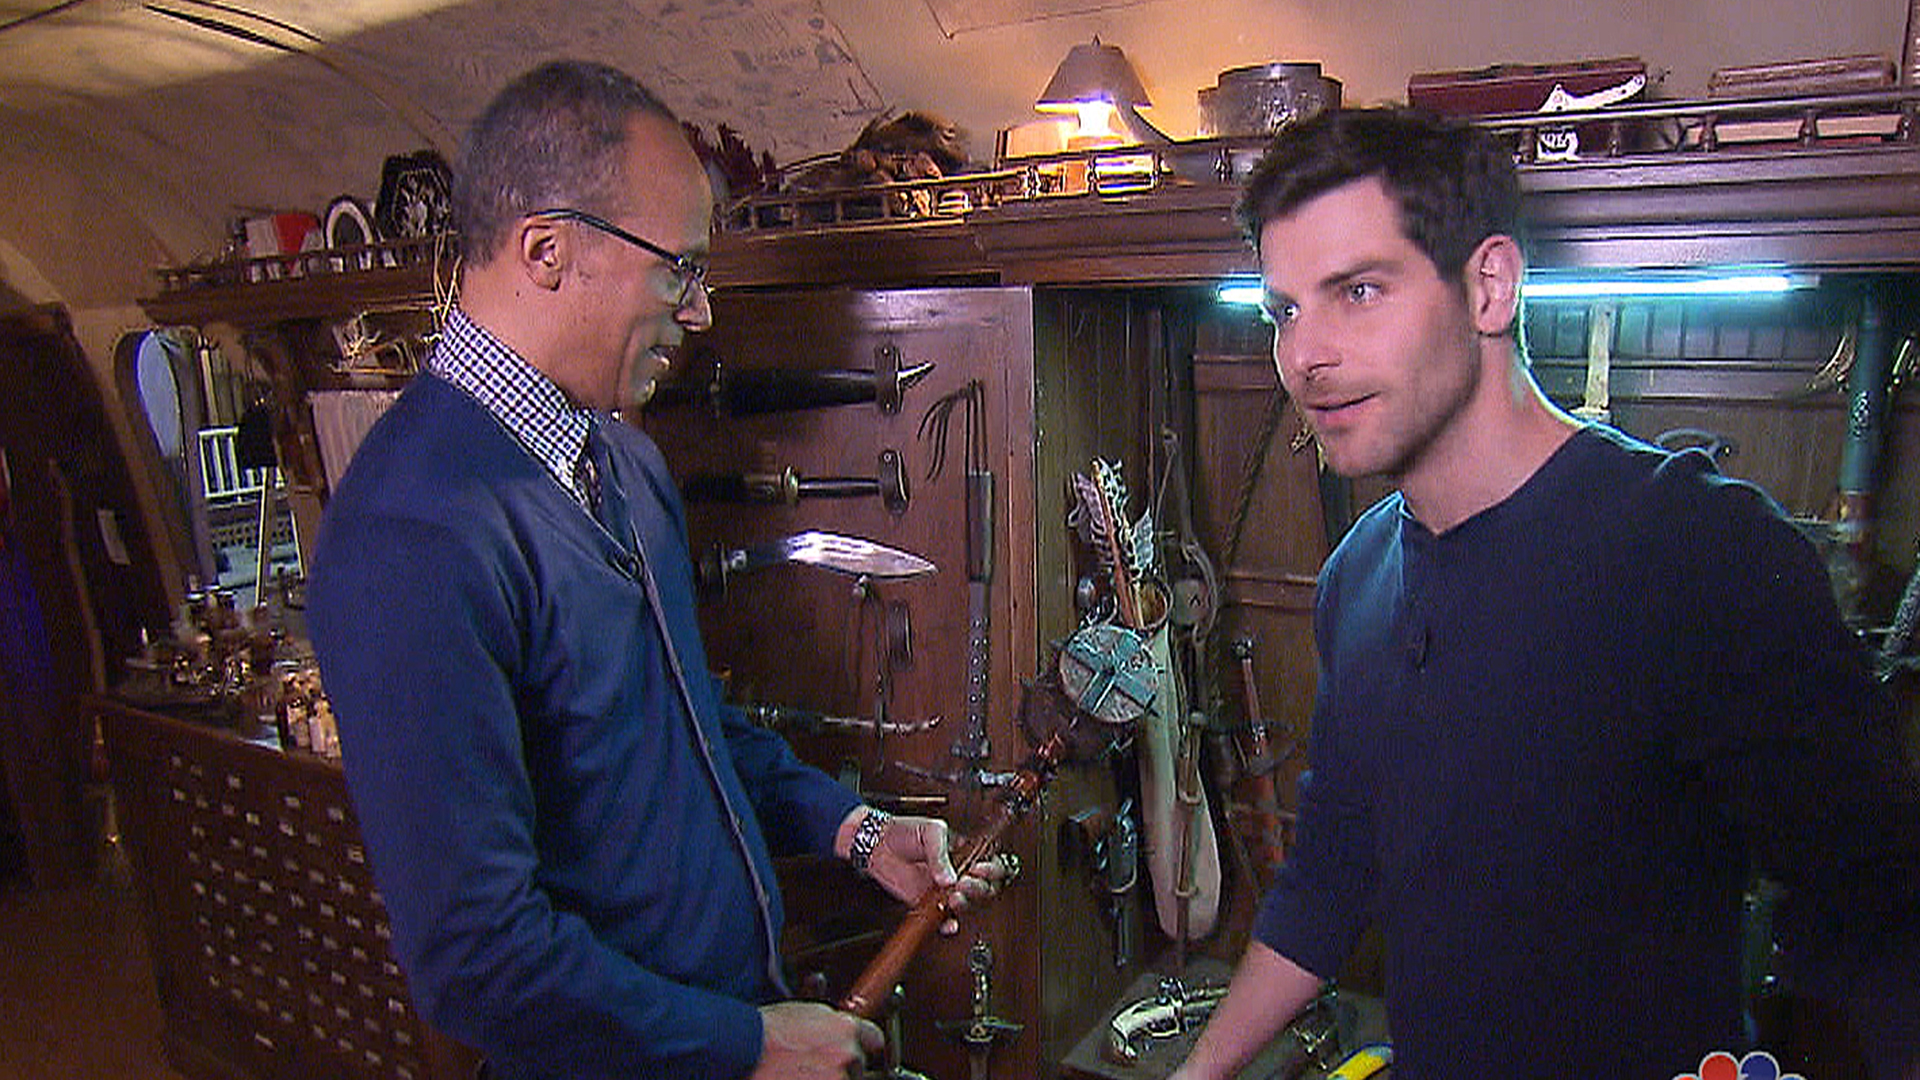 Lester Holt goes behind the scenes of ‘Grimm’ - TODAY.com